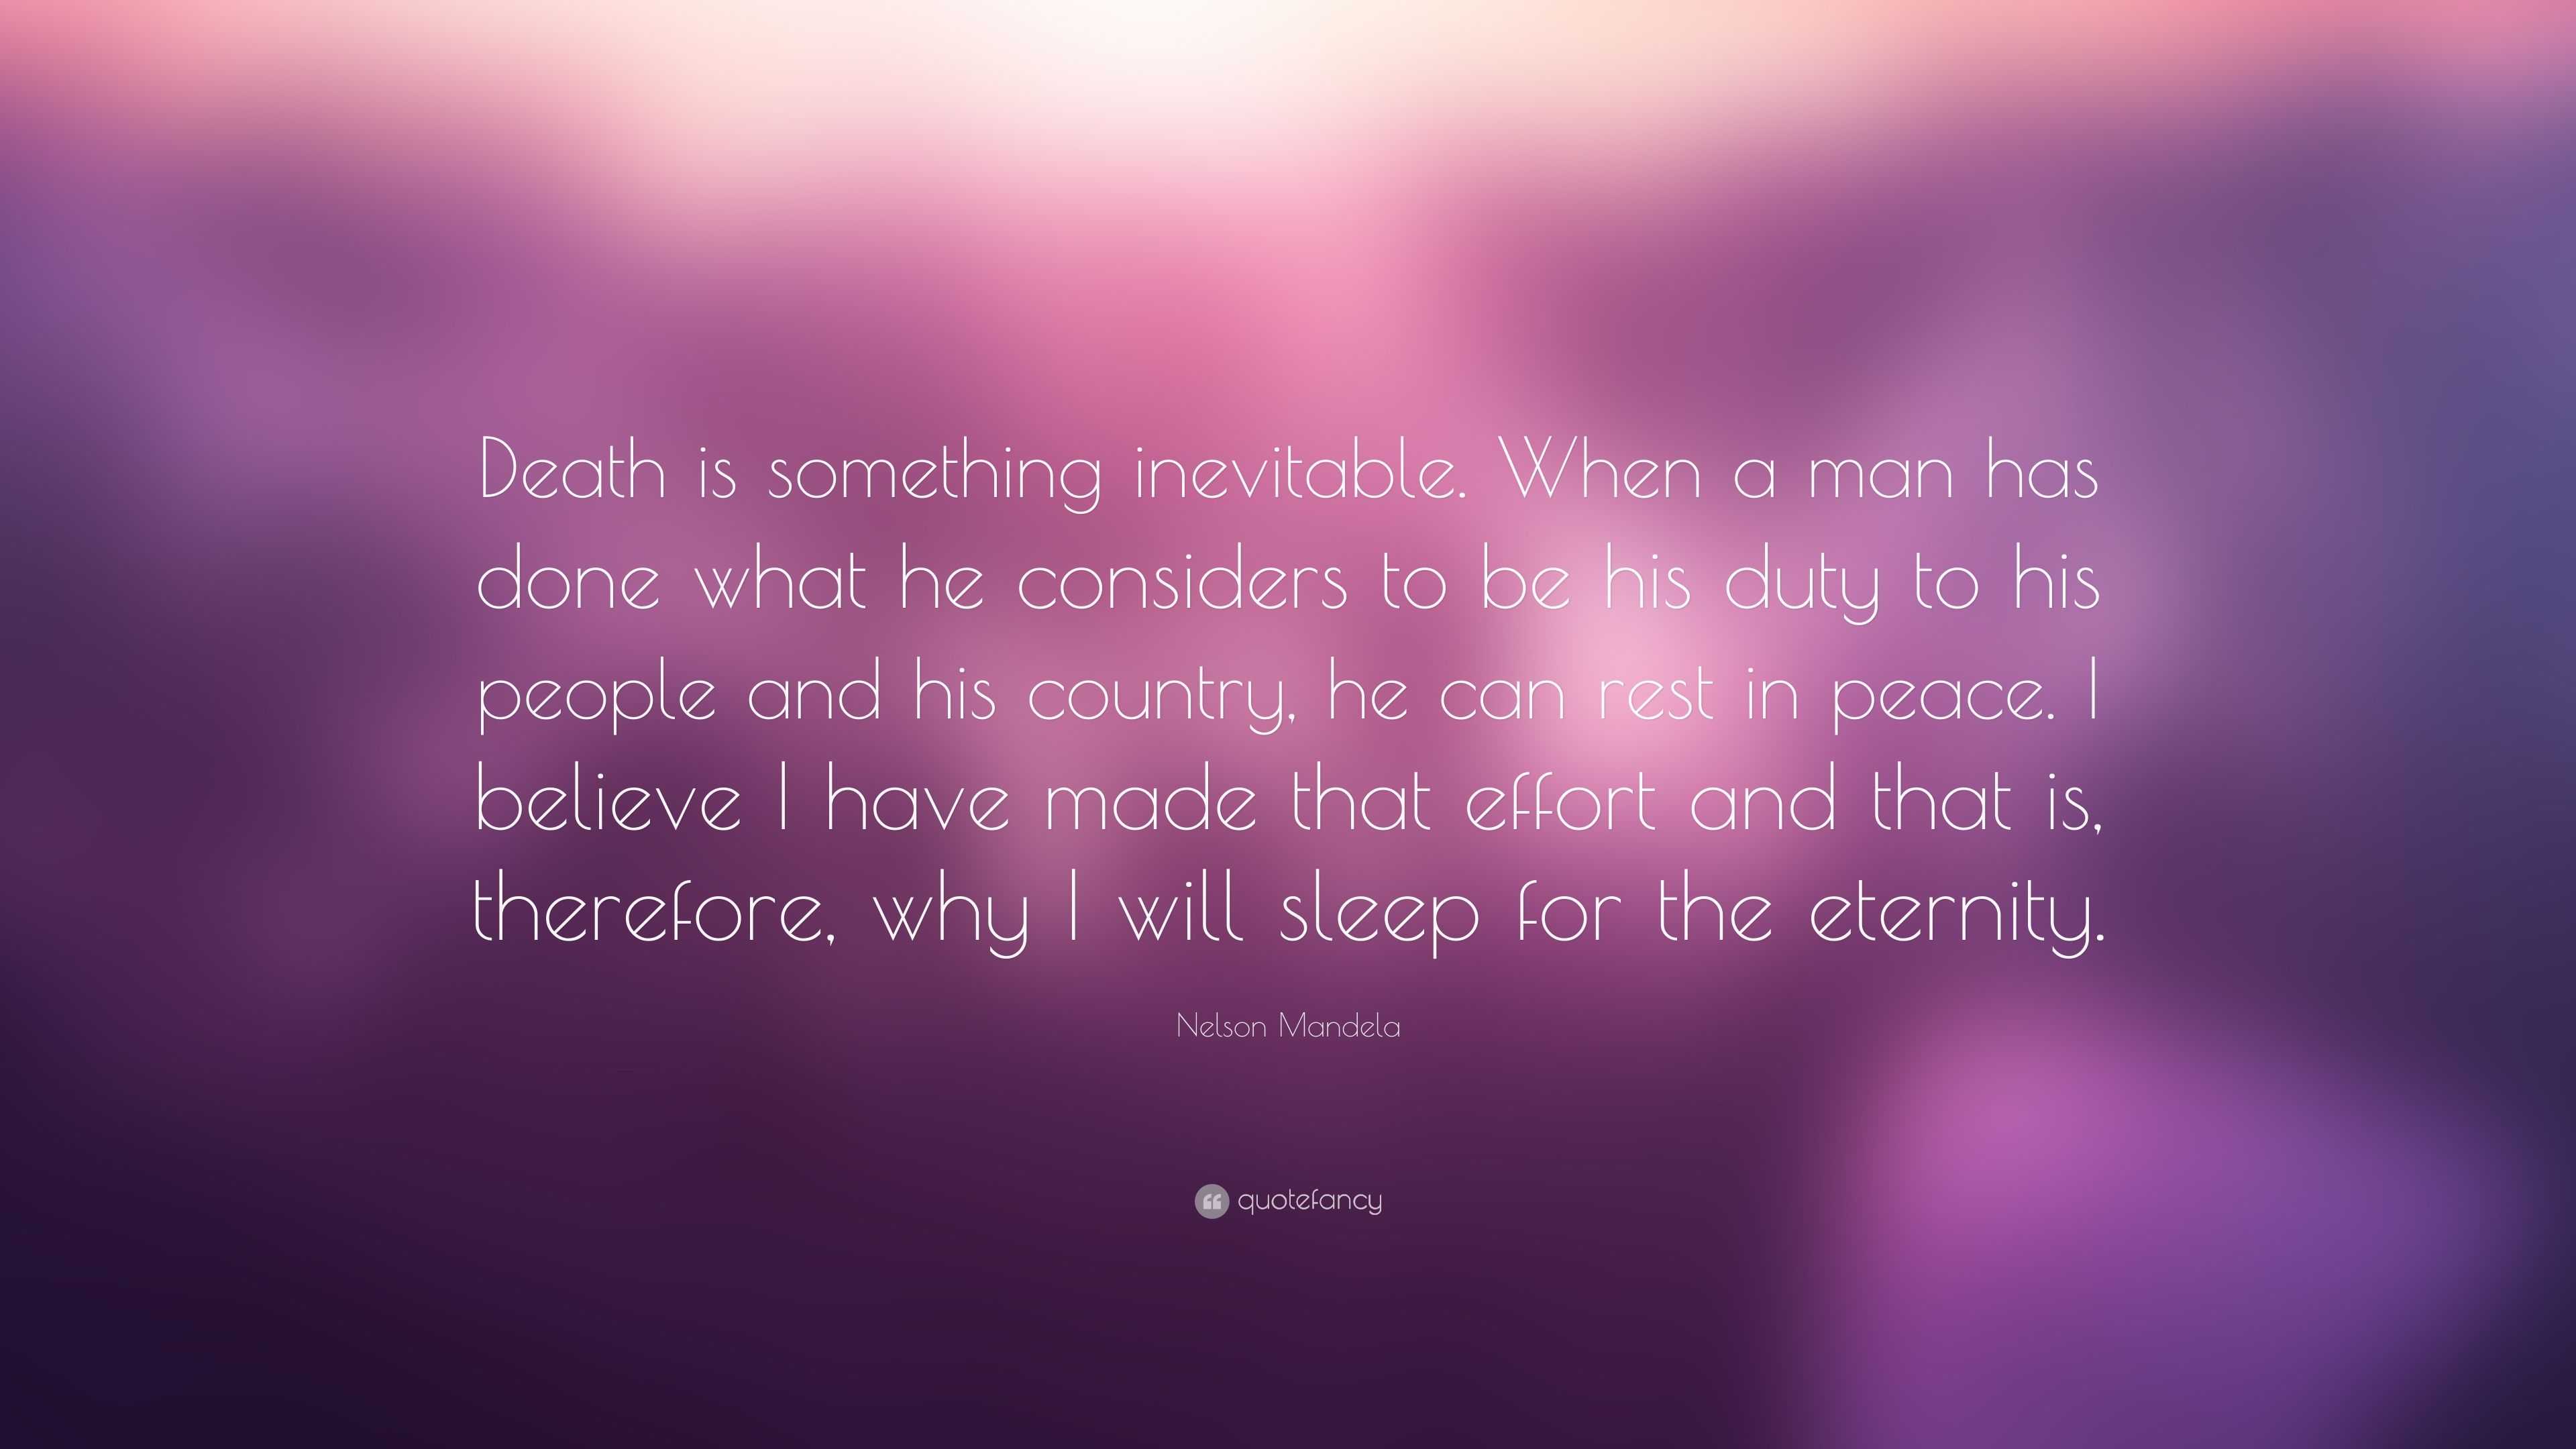 Nelson Mandela Quote: "Death is something inevitable. When a man has done what he considers to ...